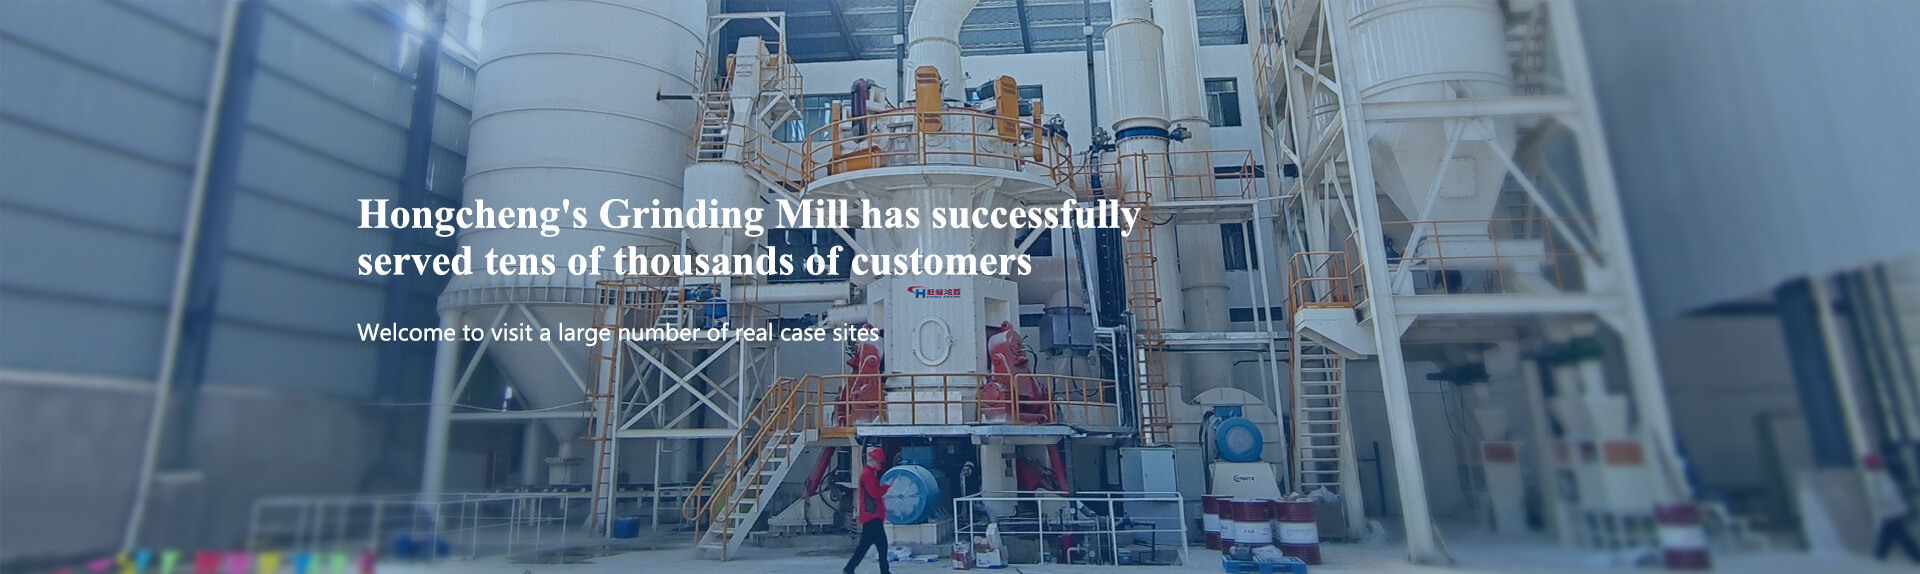 HC2000 Large Grinding Mill & Industrial Pulse Dust Collector - Zhejiang 500,000t/year Limestone Powder Processing Project